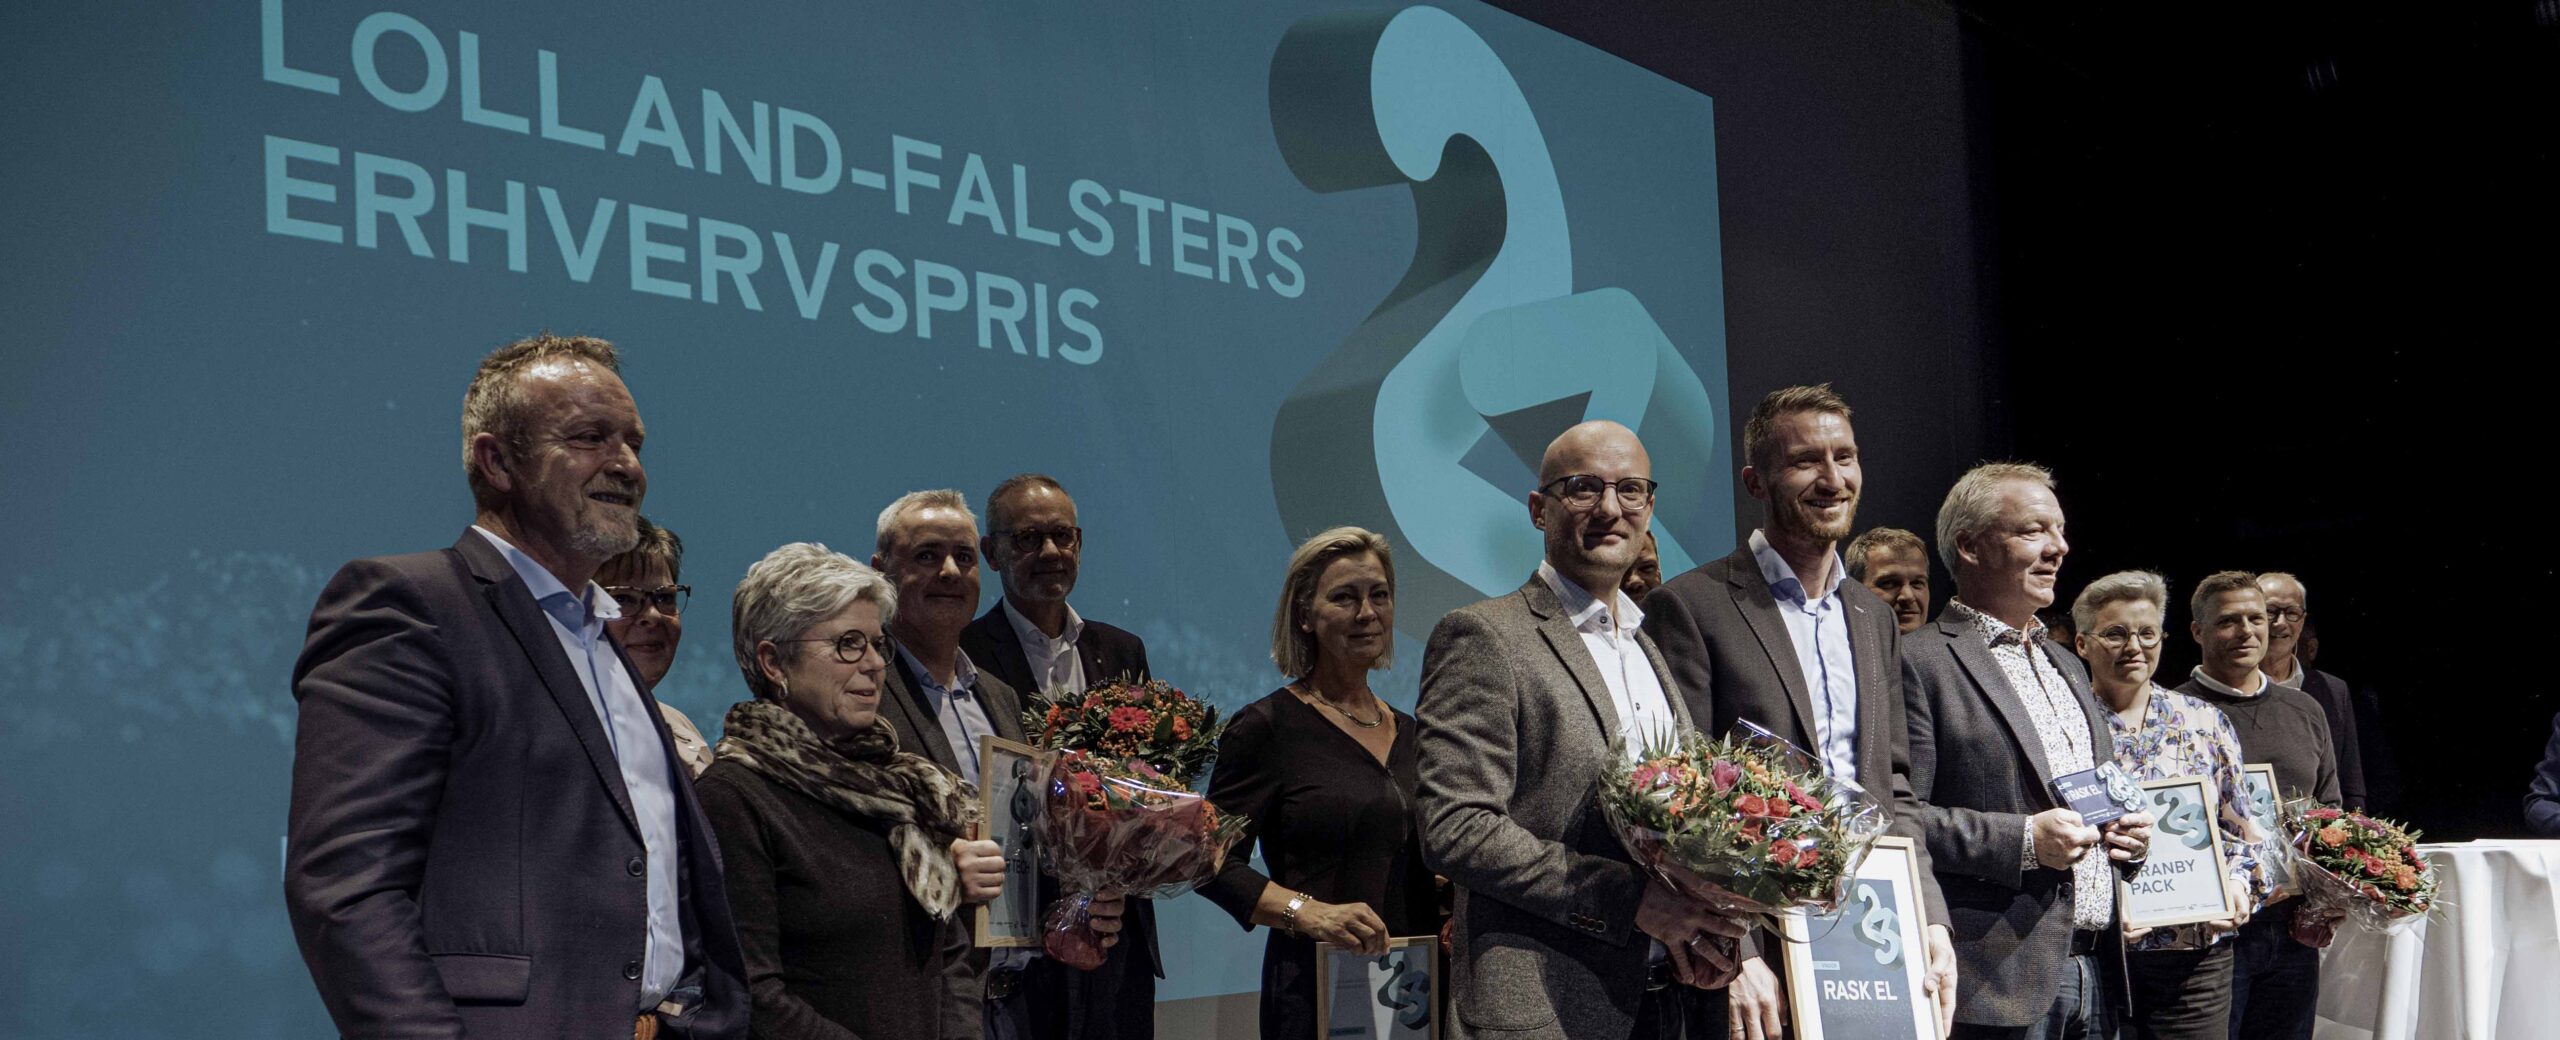 Business Lolland-Falster Events